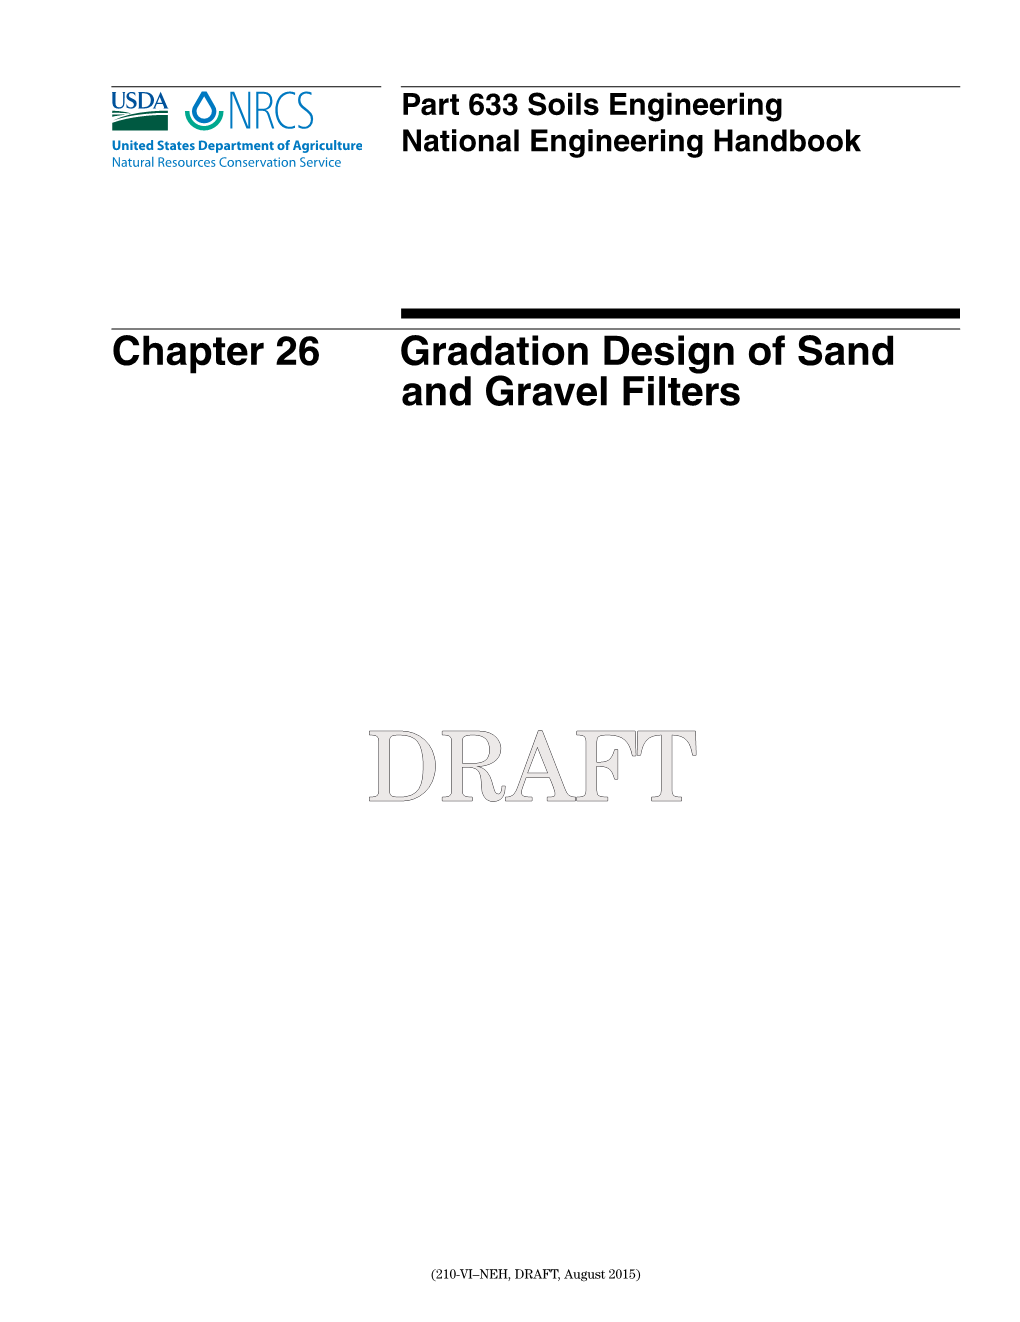 Chapter 26 Gradation Design of Sand and Gravel Filters